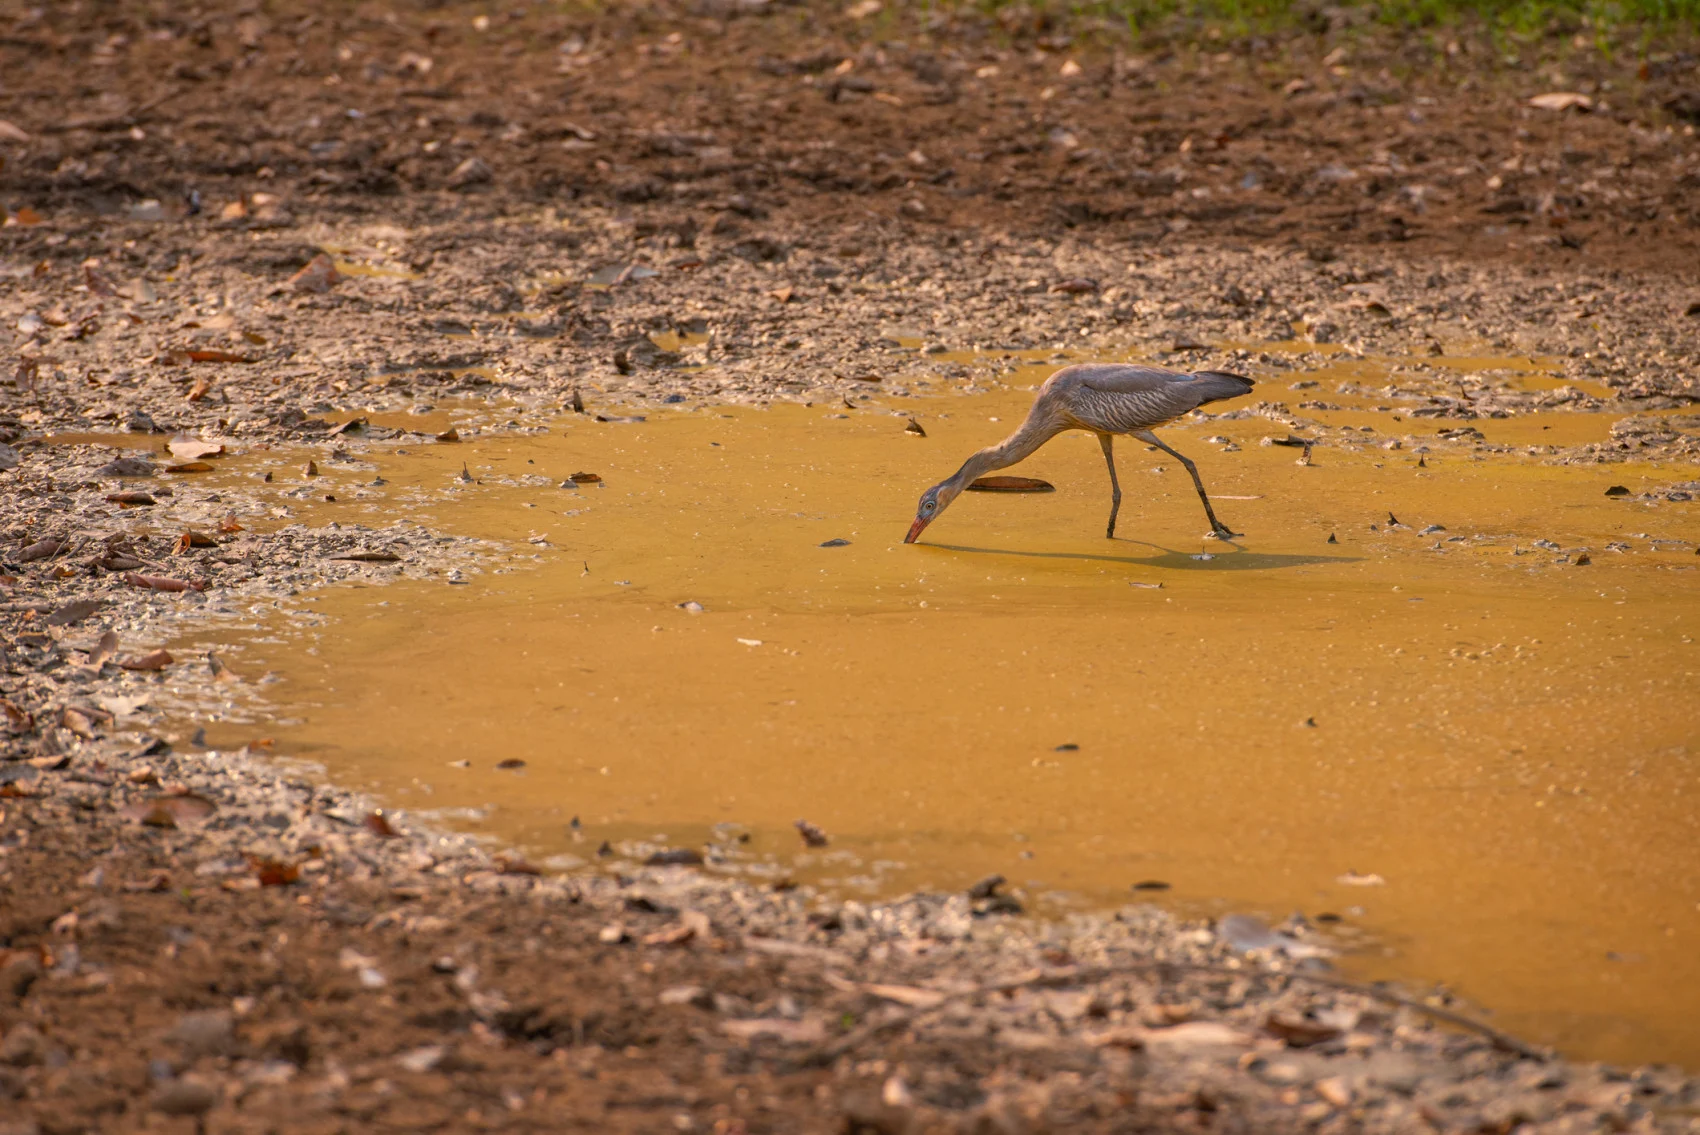 bird in a drought in brazil (Lucas Ninno/ Moment/ Getty Images)